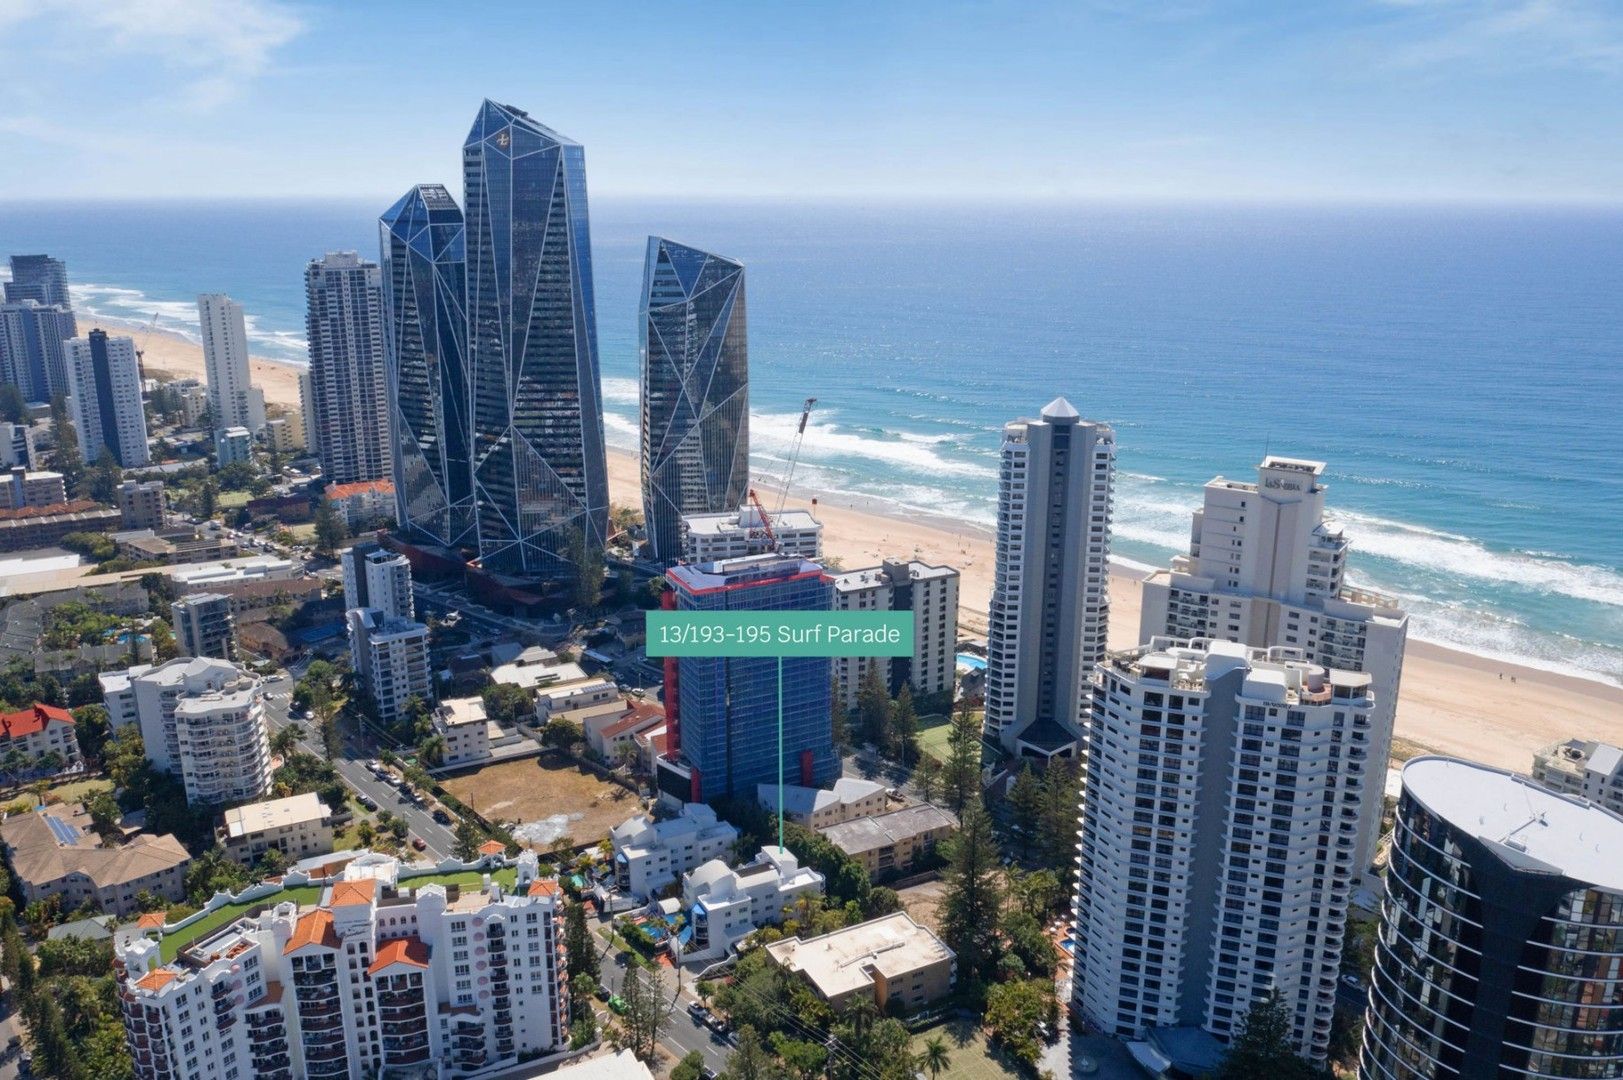 1 bedrooms Apartment / Unit / Flat in 12/193-195 Surf Parade SURFERS PARADISE QLD, 4217